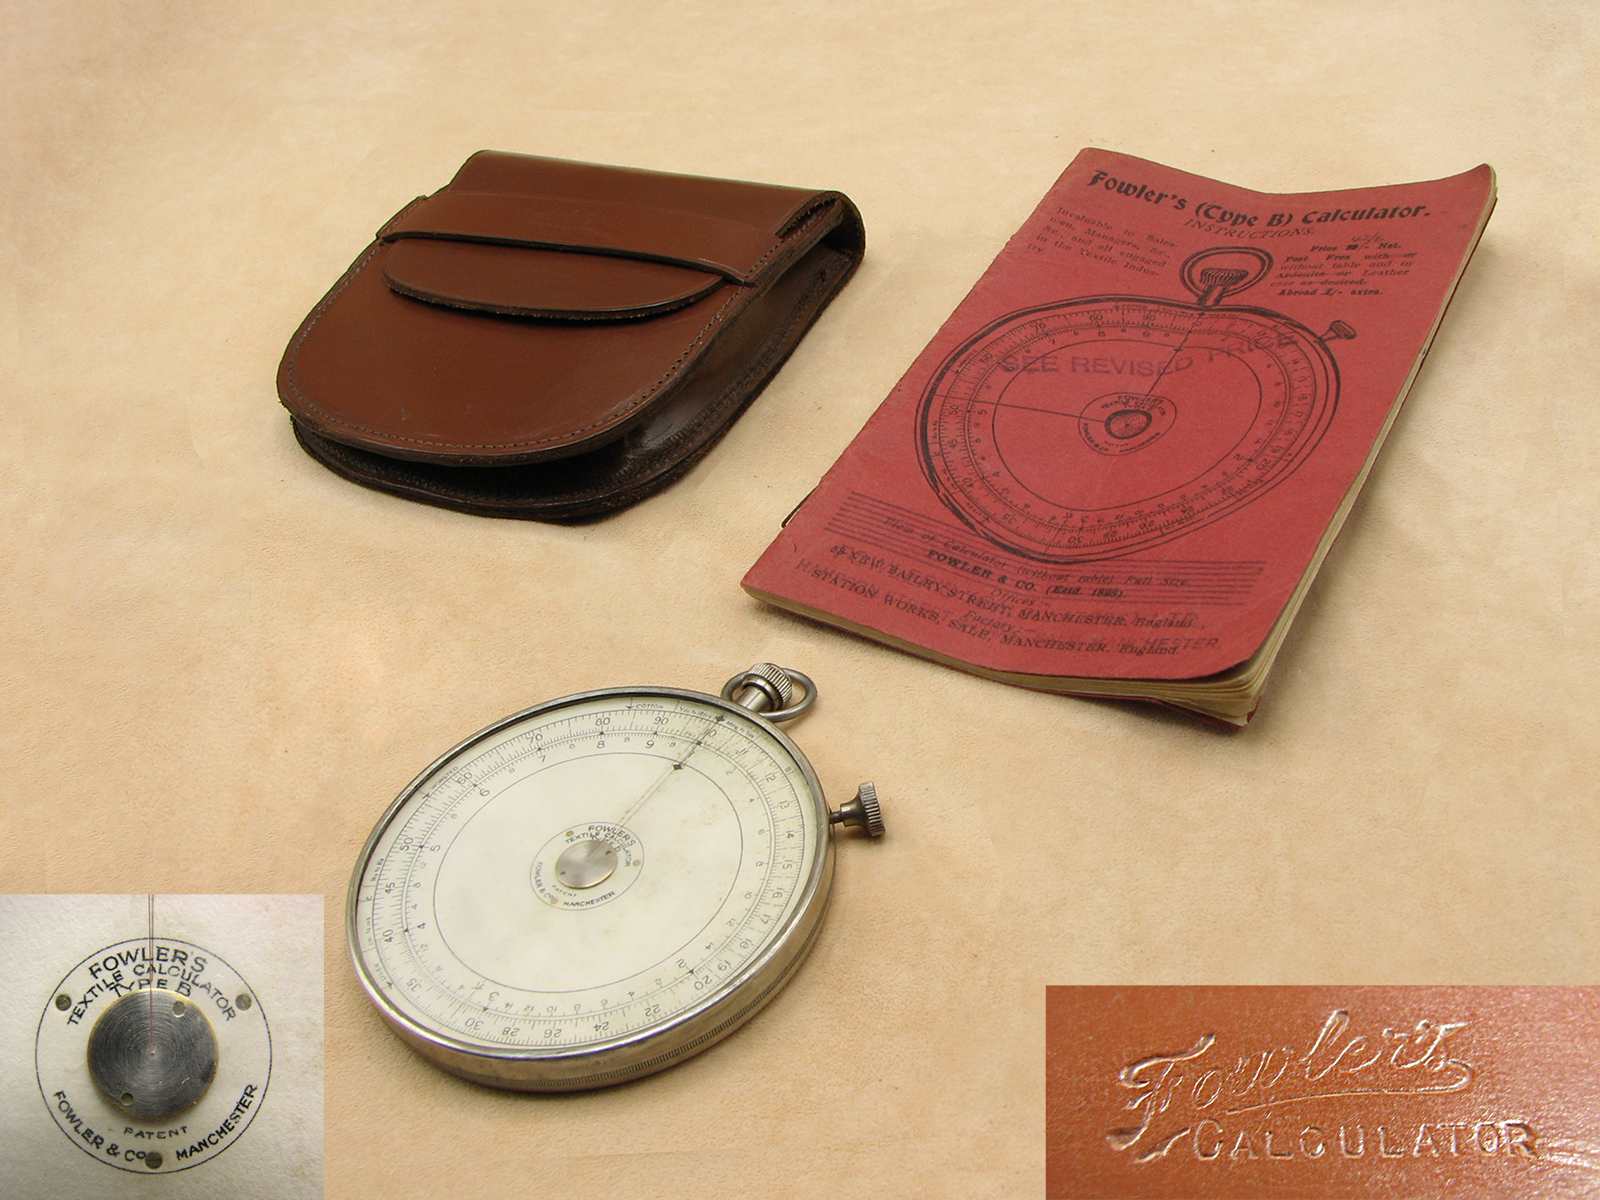 1920's Fowler's Type B Textile calculator in leather case with original instruction booklet.